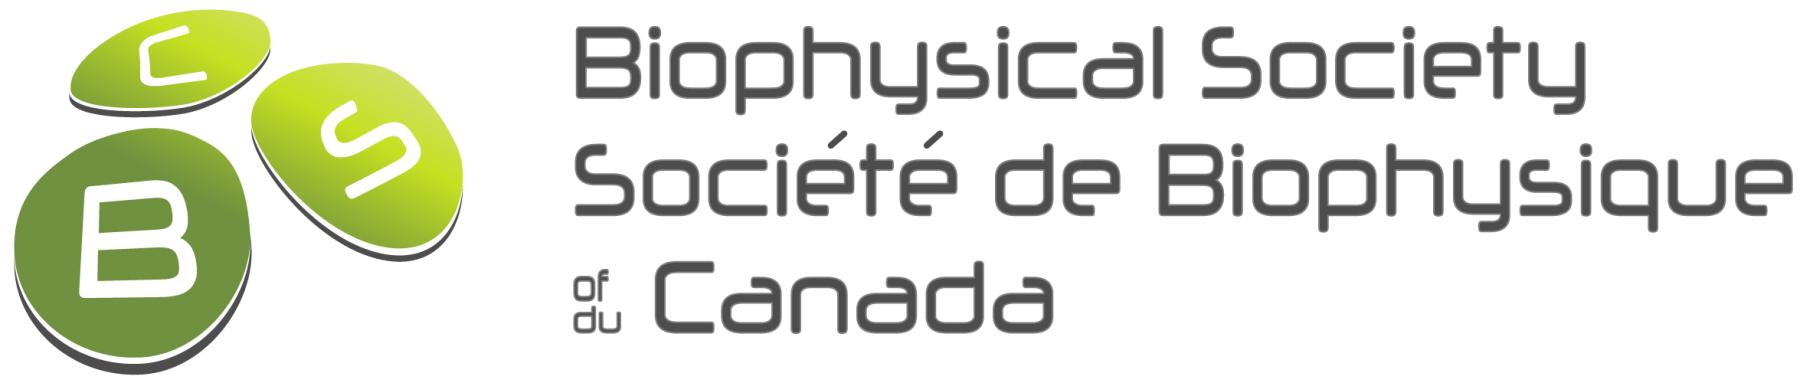 Logo of the Biophysical Society of Canada